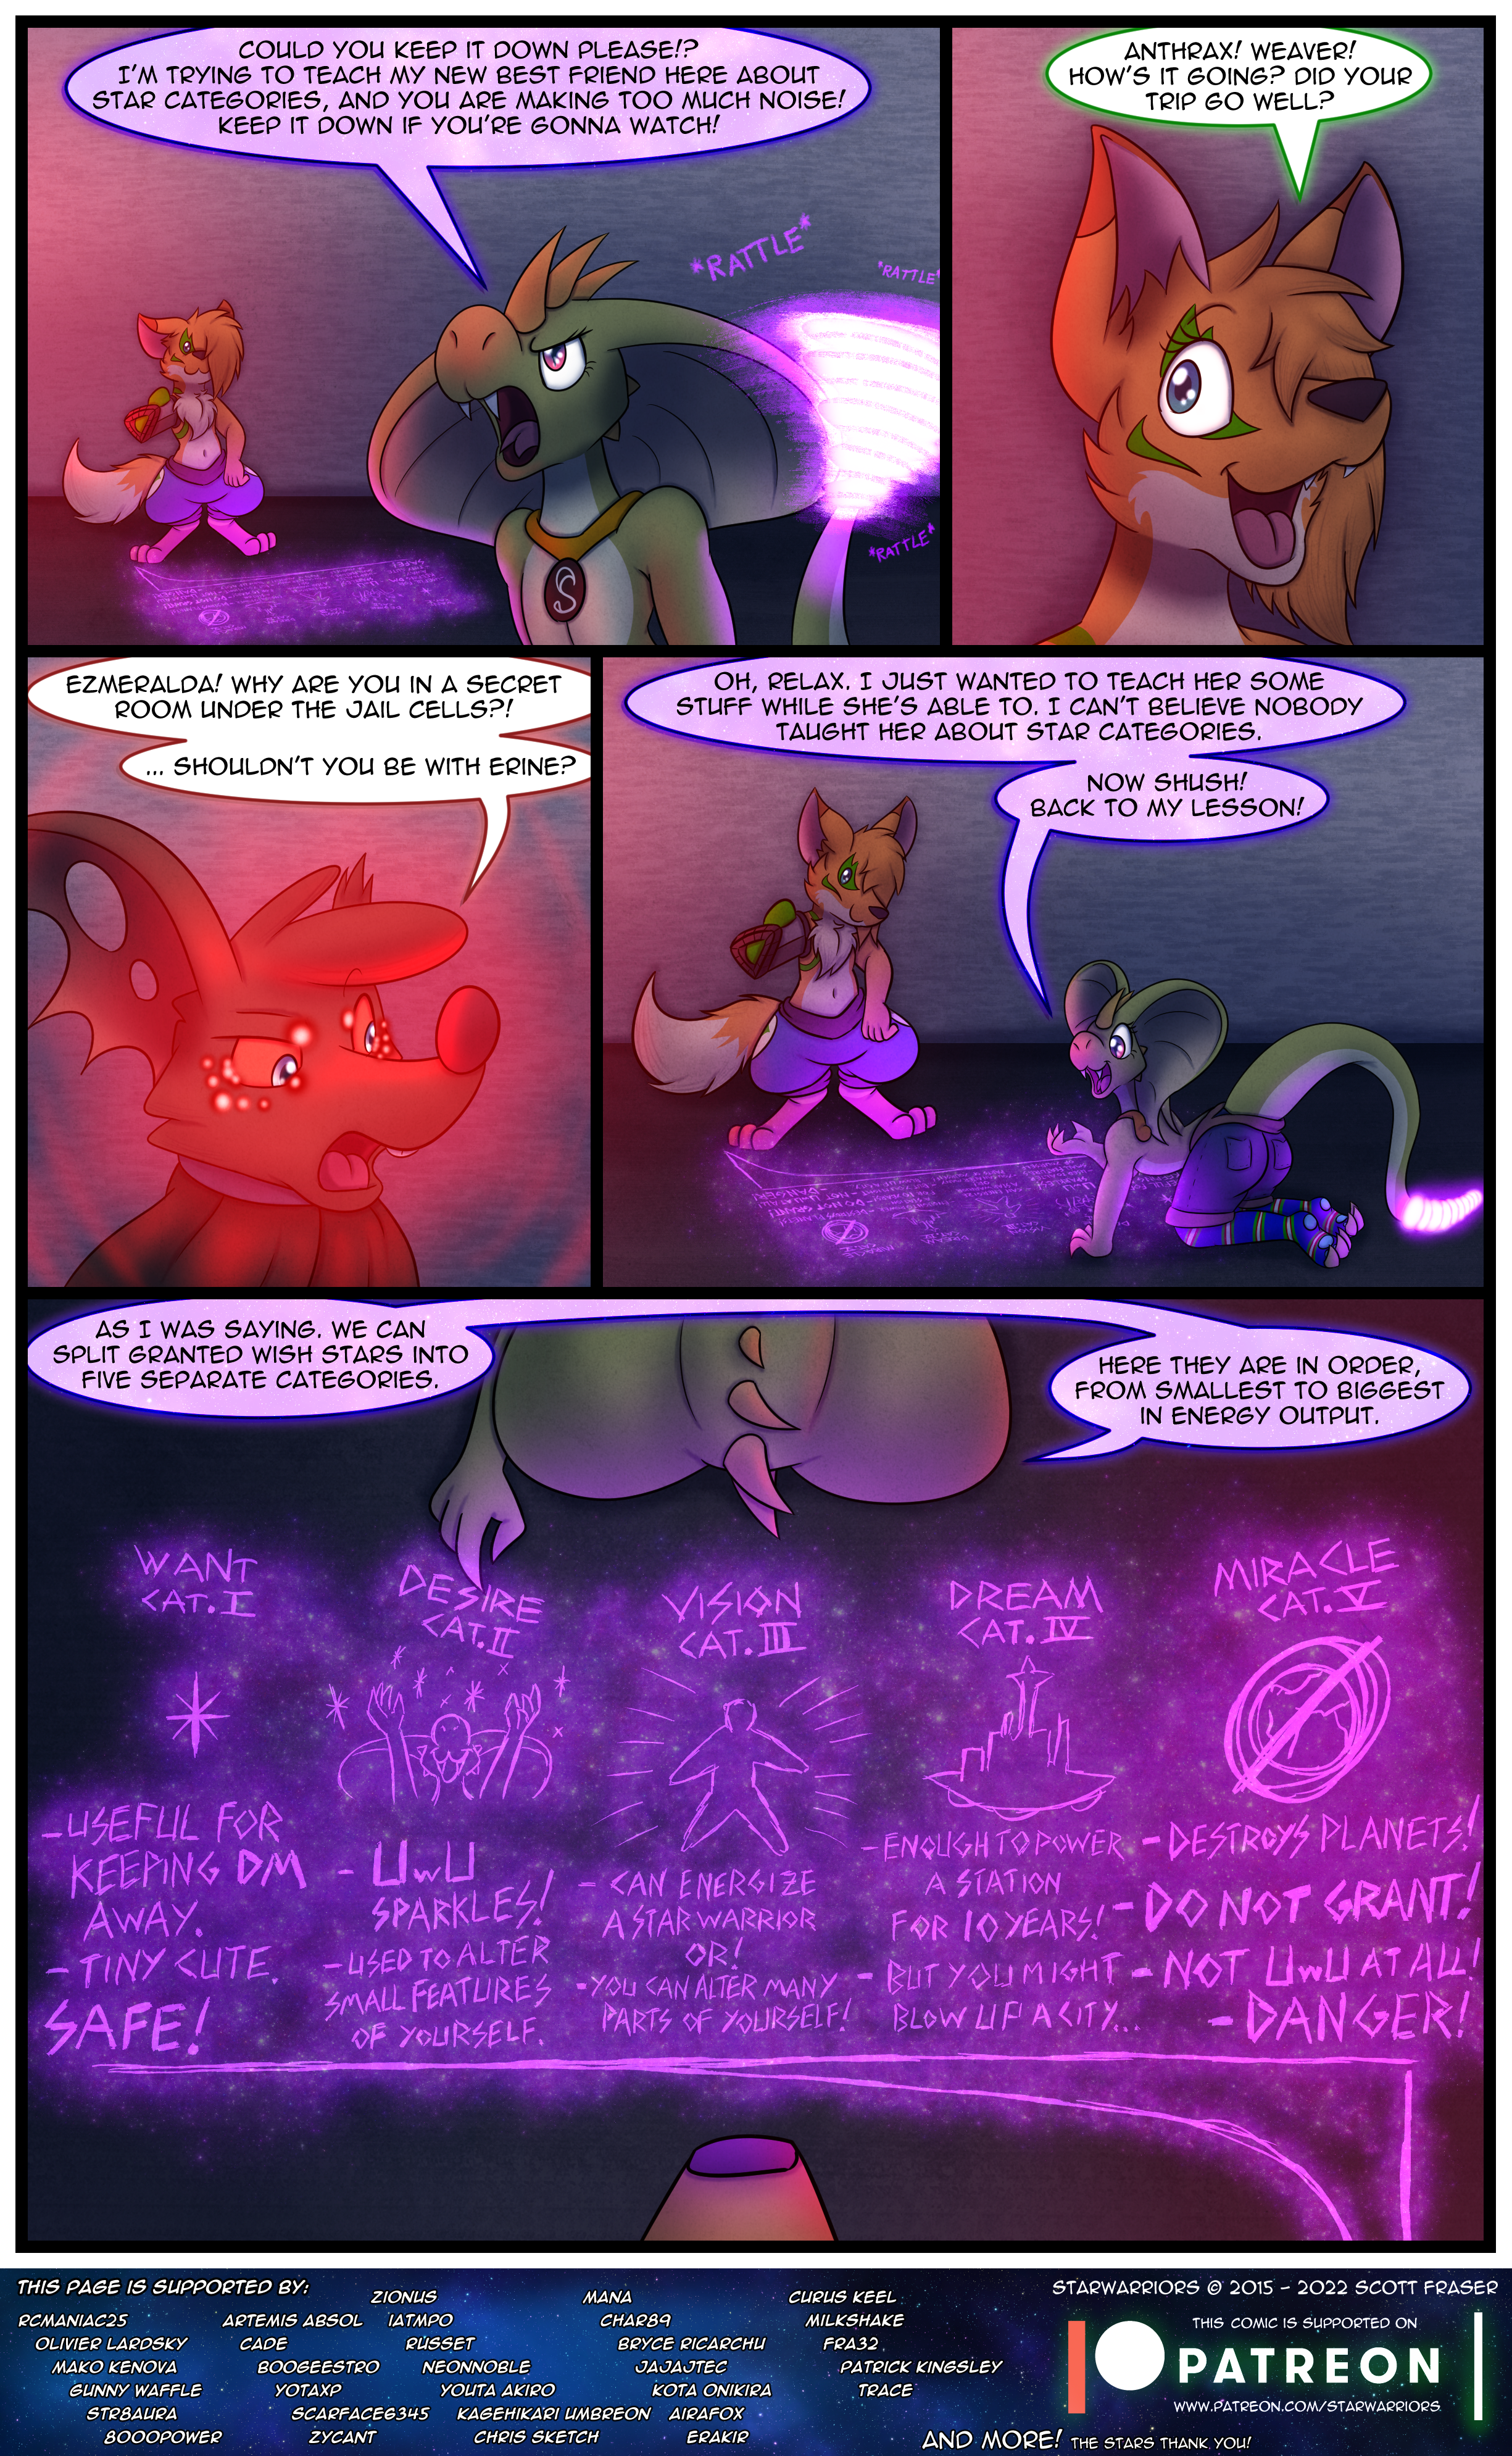 Ch6 Page 20 – Star Categories